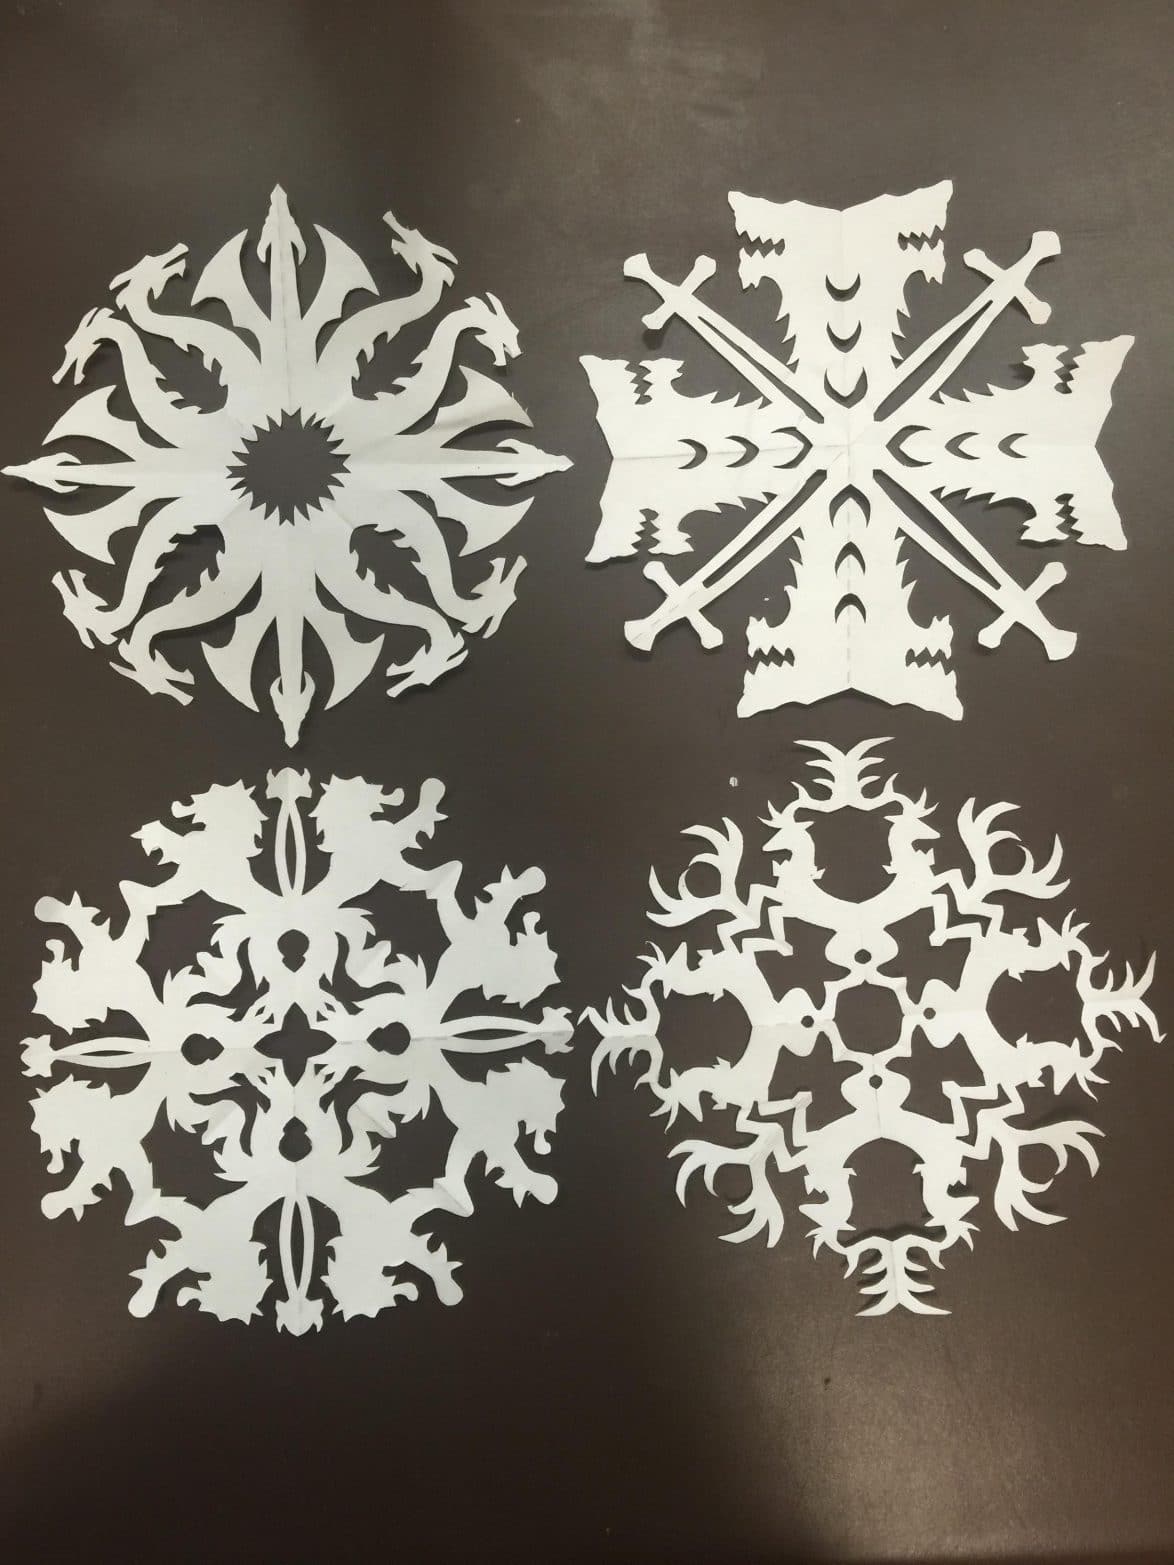 Make your own Game of Thrones snowflakes